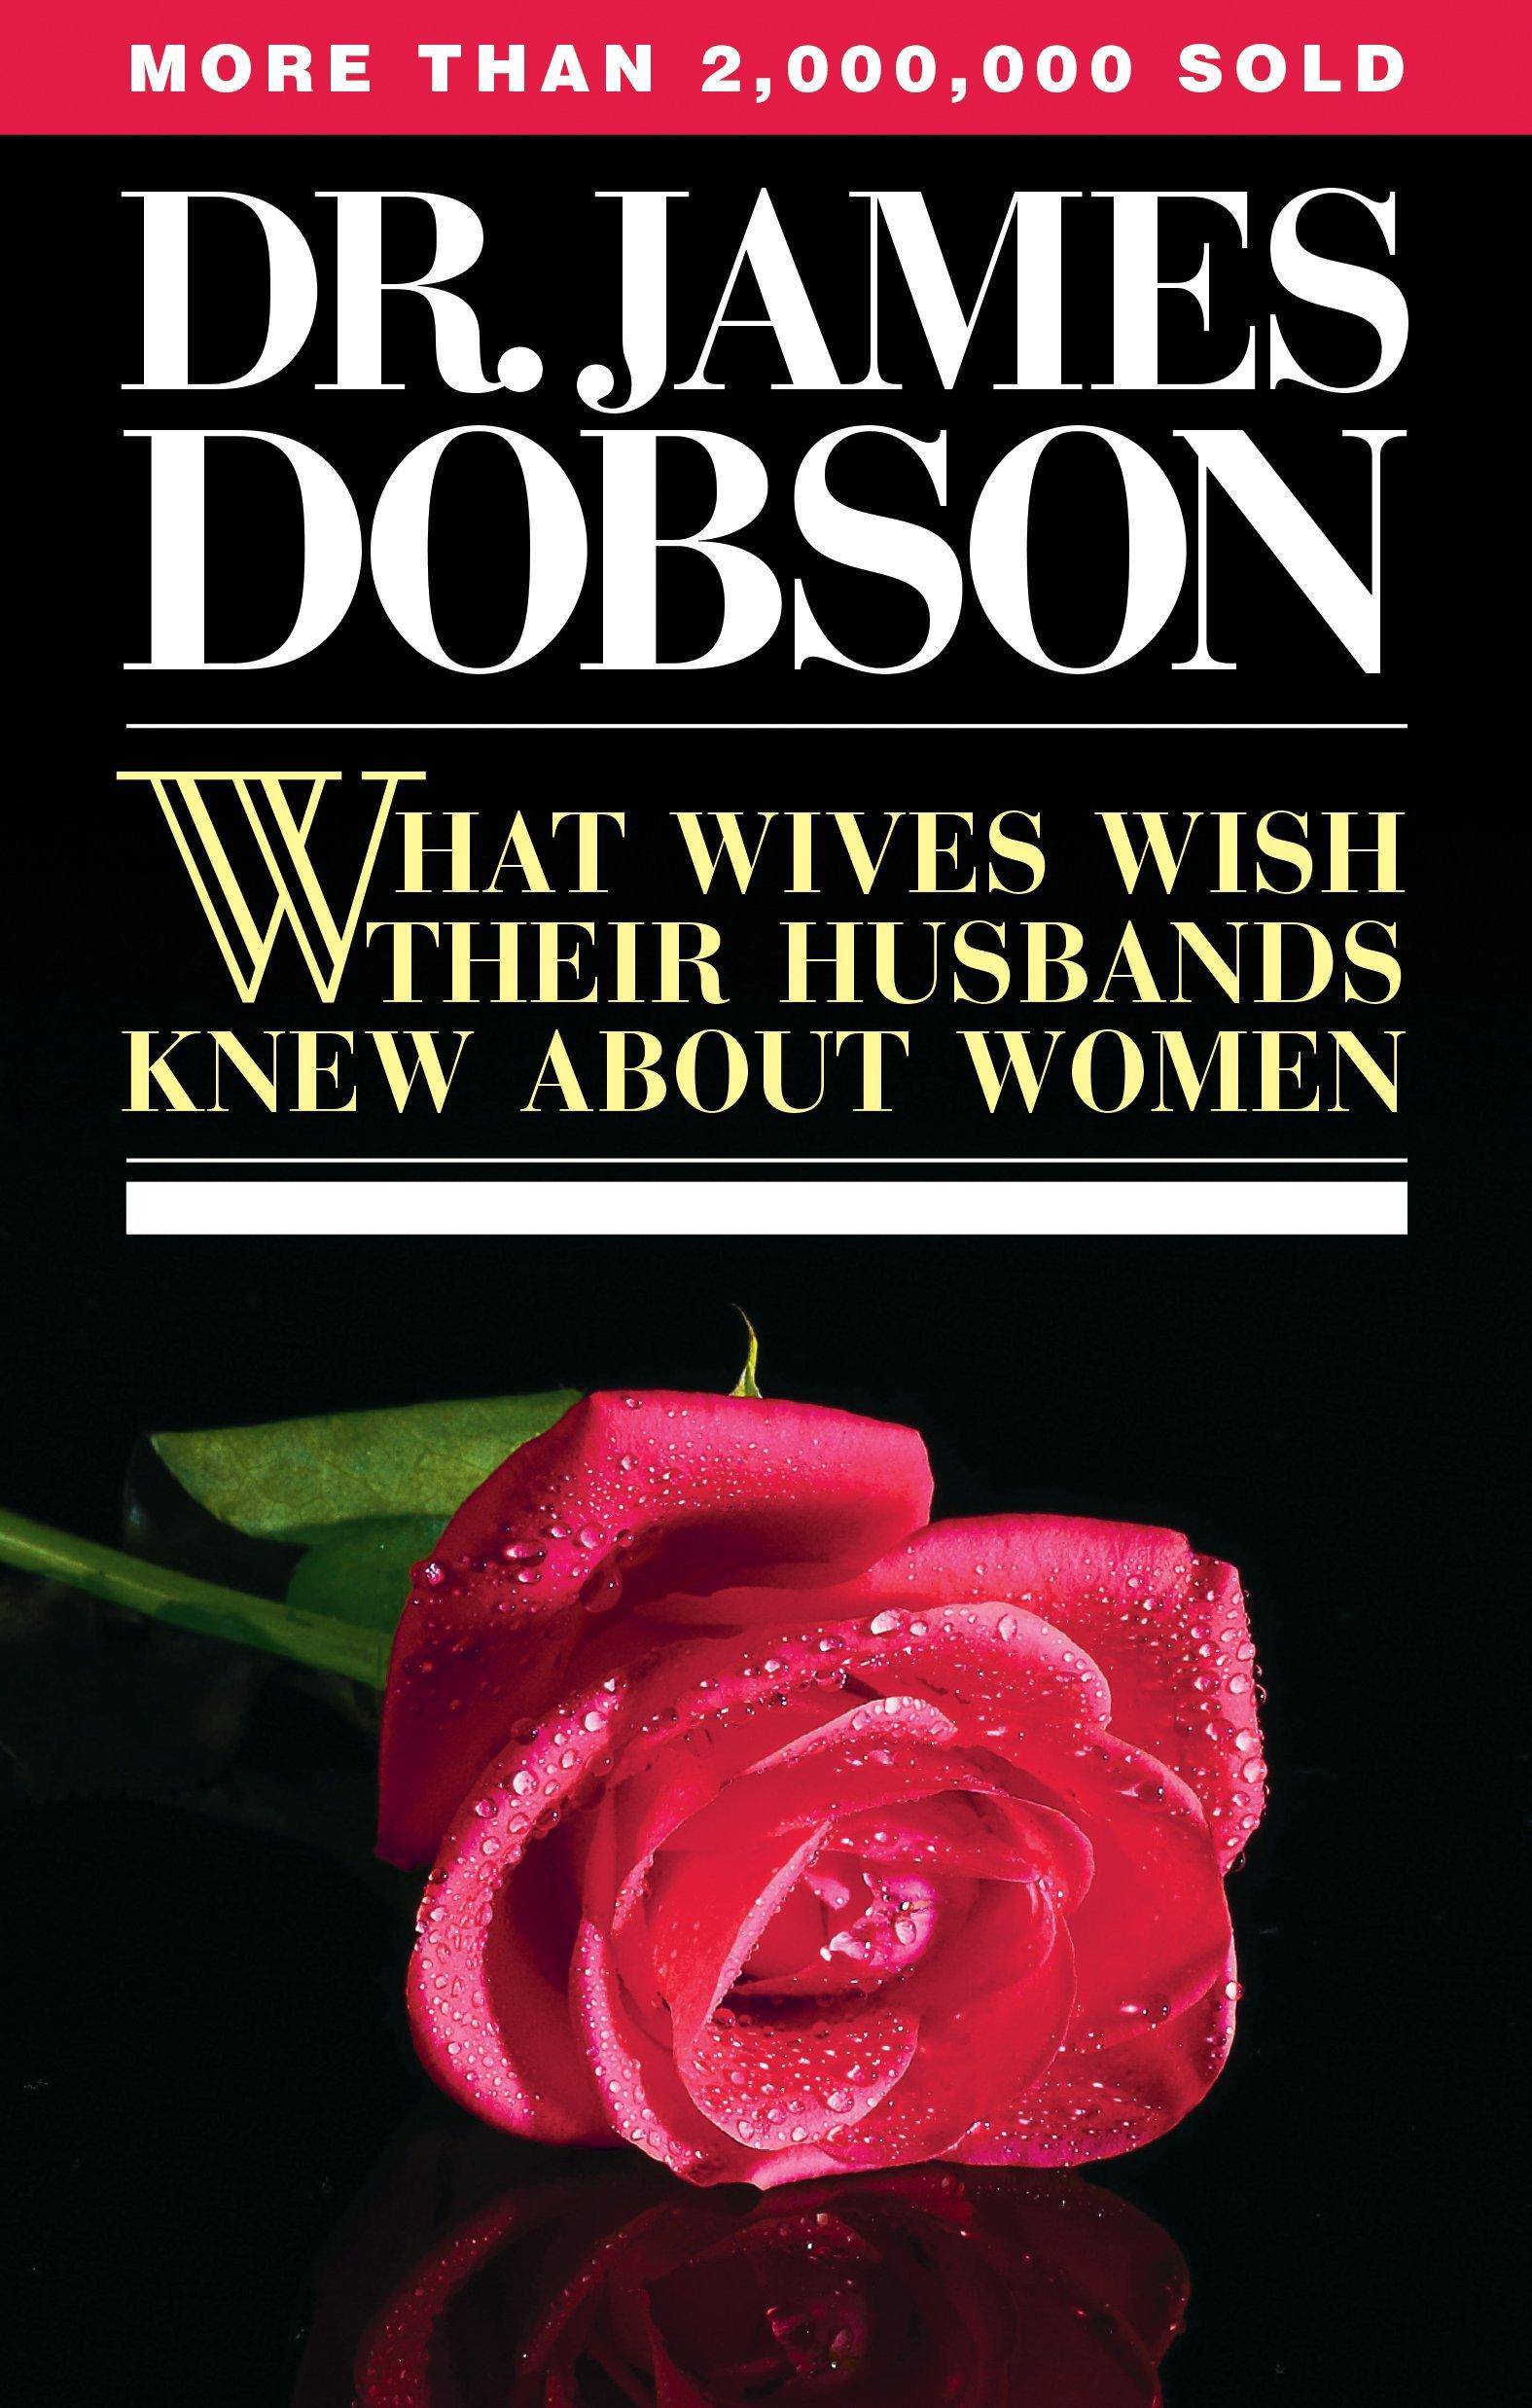 What Wives Wish Their Husbands Knew About Women - SureShot Books Publishing LLC